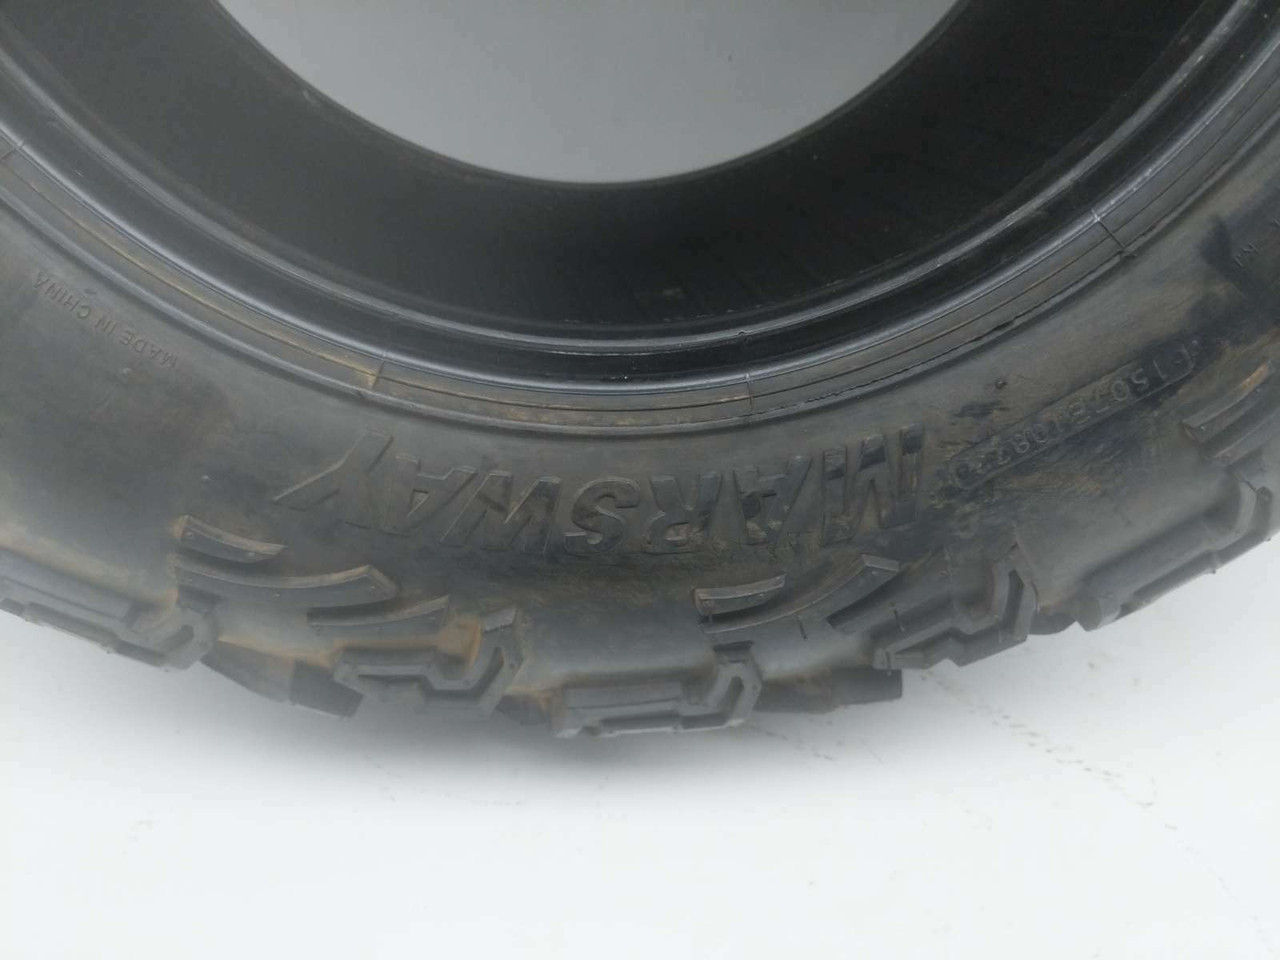 16 Odes Dominator X2 1000 4x4 LT EPS MARSWAY SL318 AT Front Tire 27x9-14 W  - Sun Coast Cycle Sports | Used Motorcycle Parts